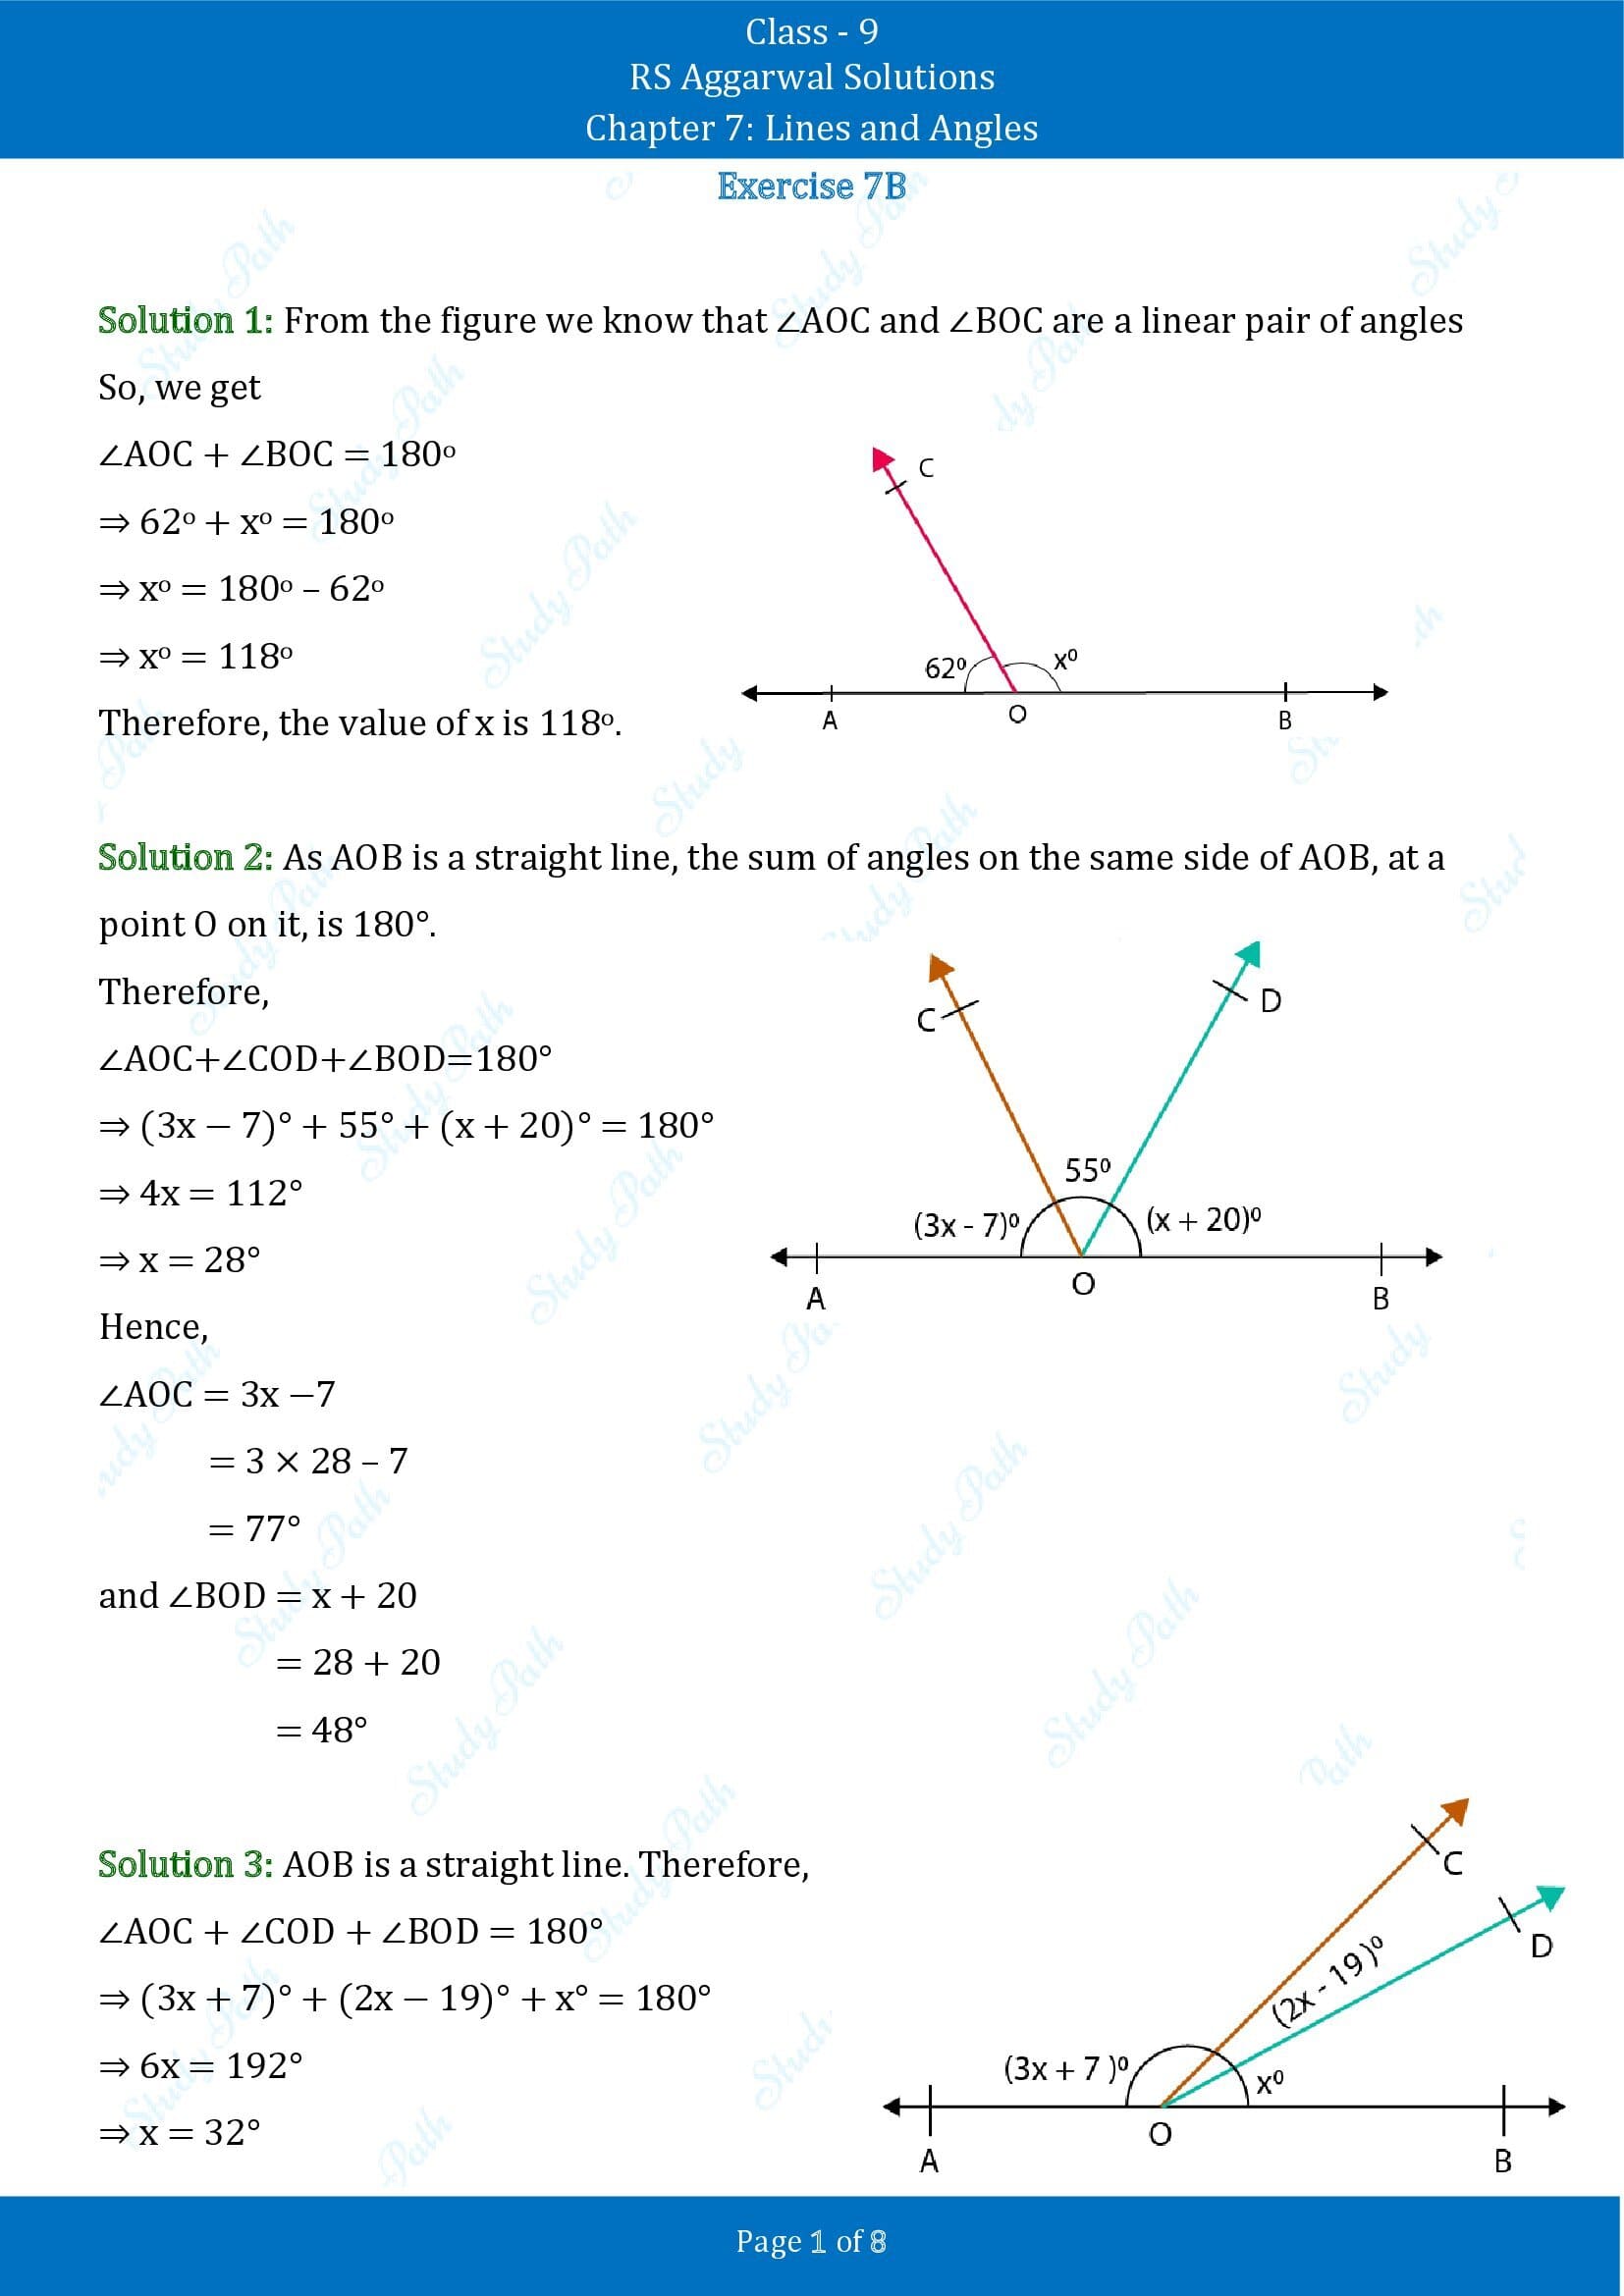 RS Aggarwal Solutions Class 9 Chapter 7 Lines and Angles Exercise 7B 00001